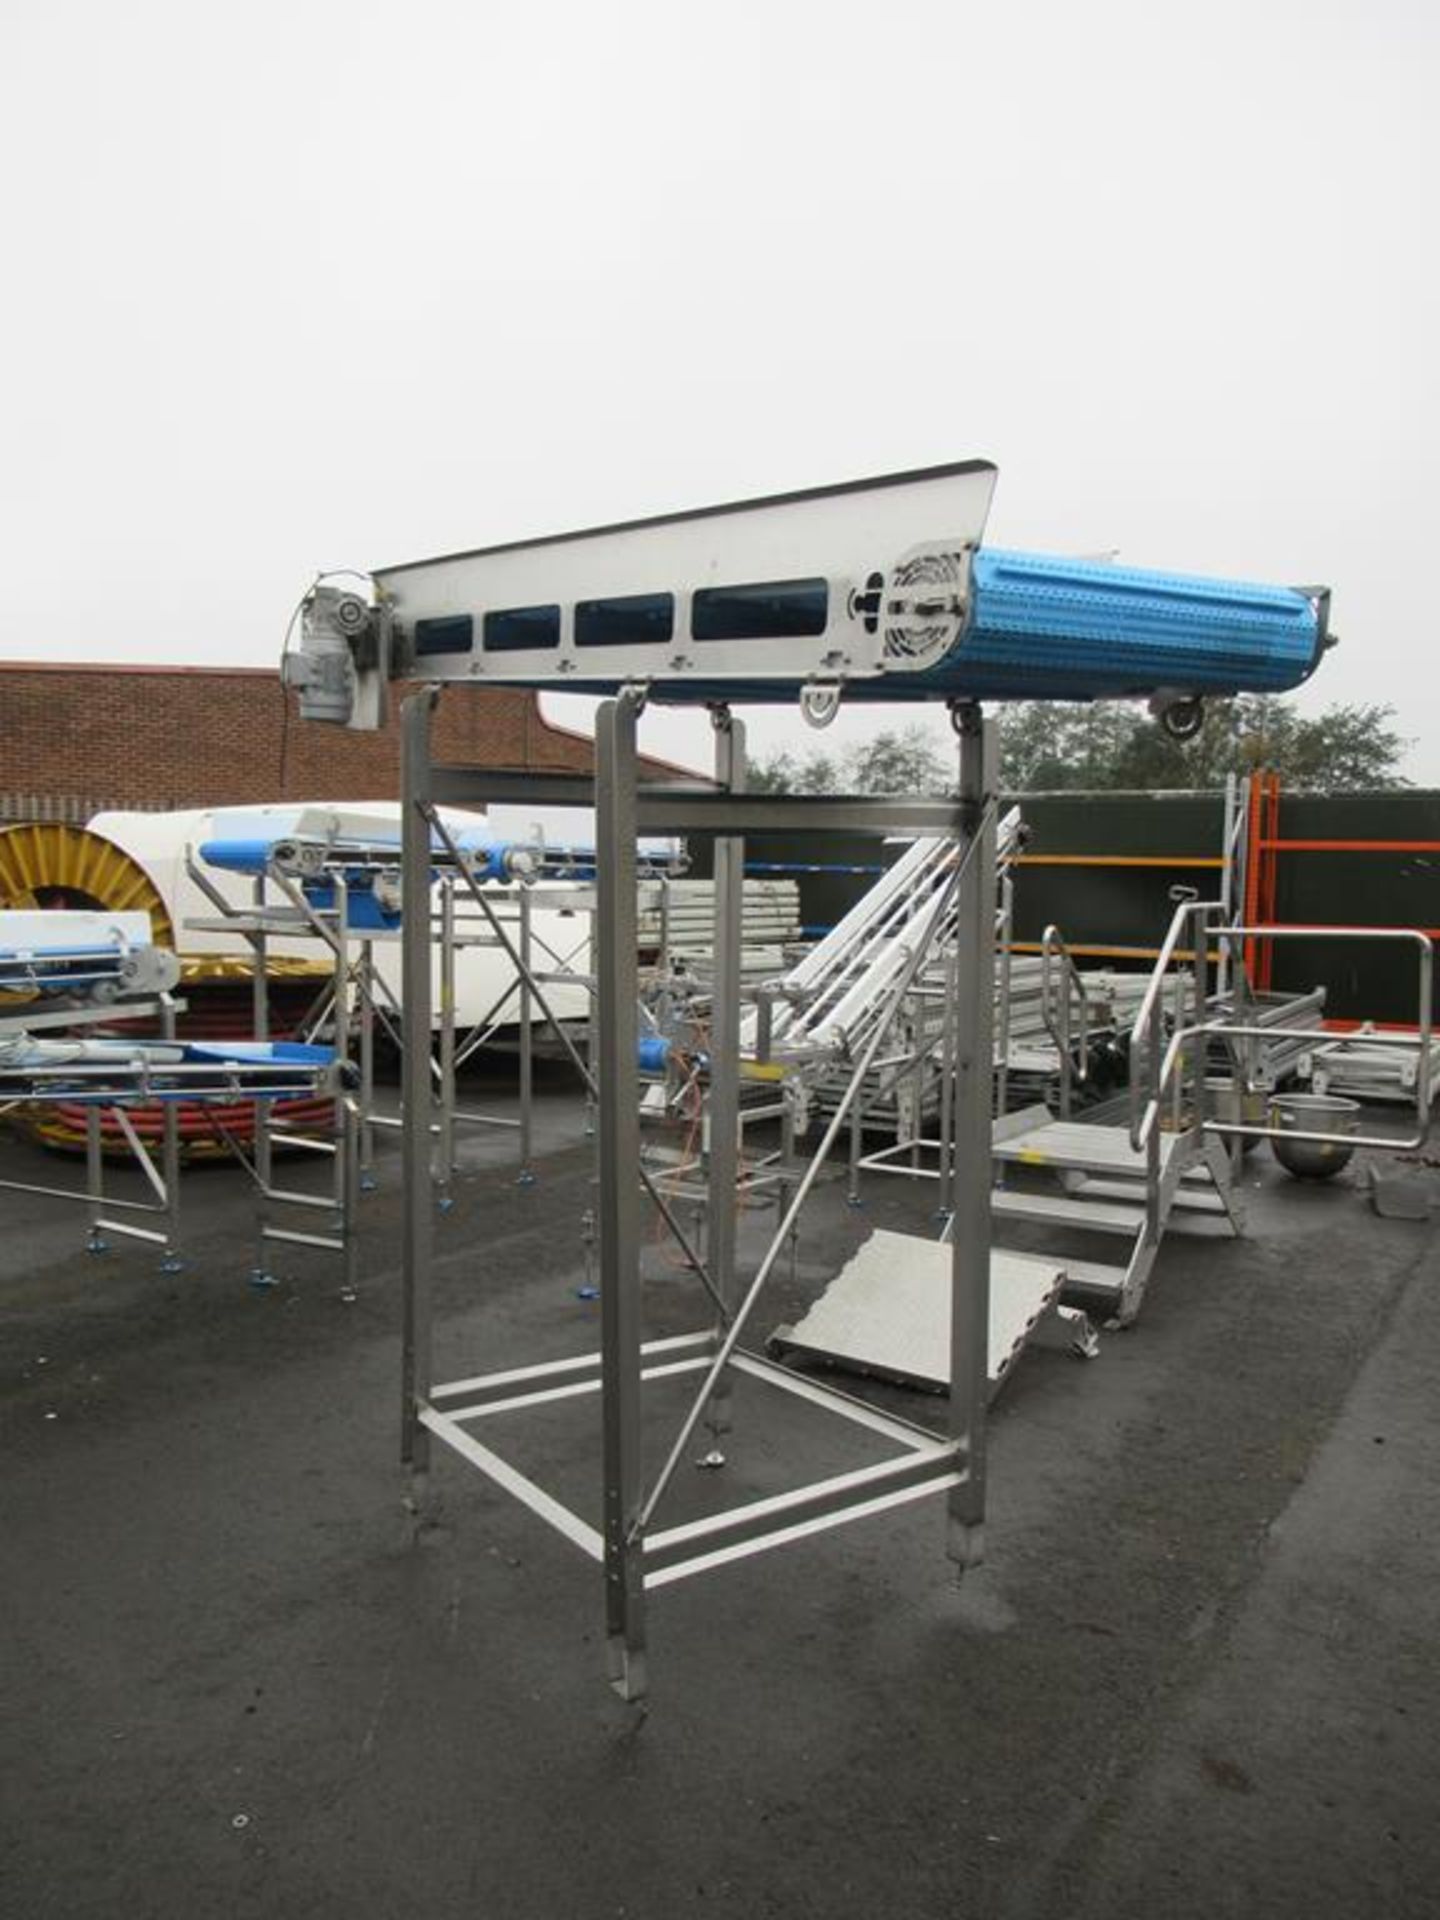 Stainless Steel Raised Conveyor System with Electric Motor Height approx 2600 x Length 2440 x 850 mm - Image 4 of 6